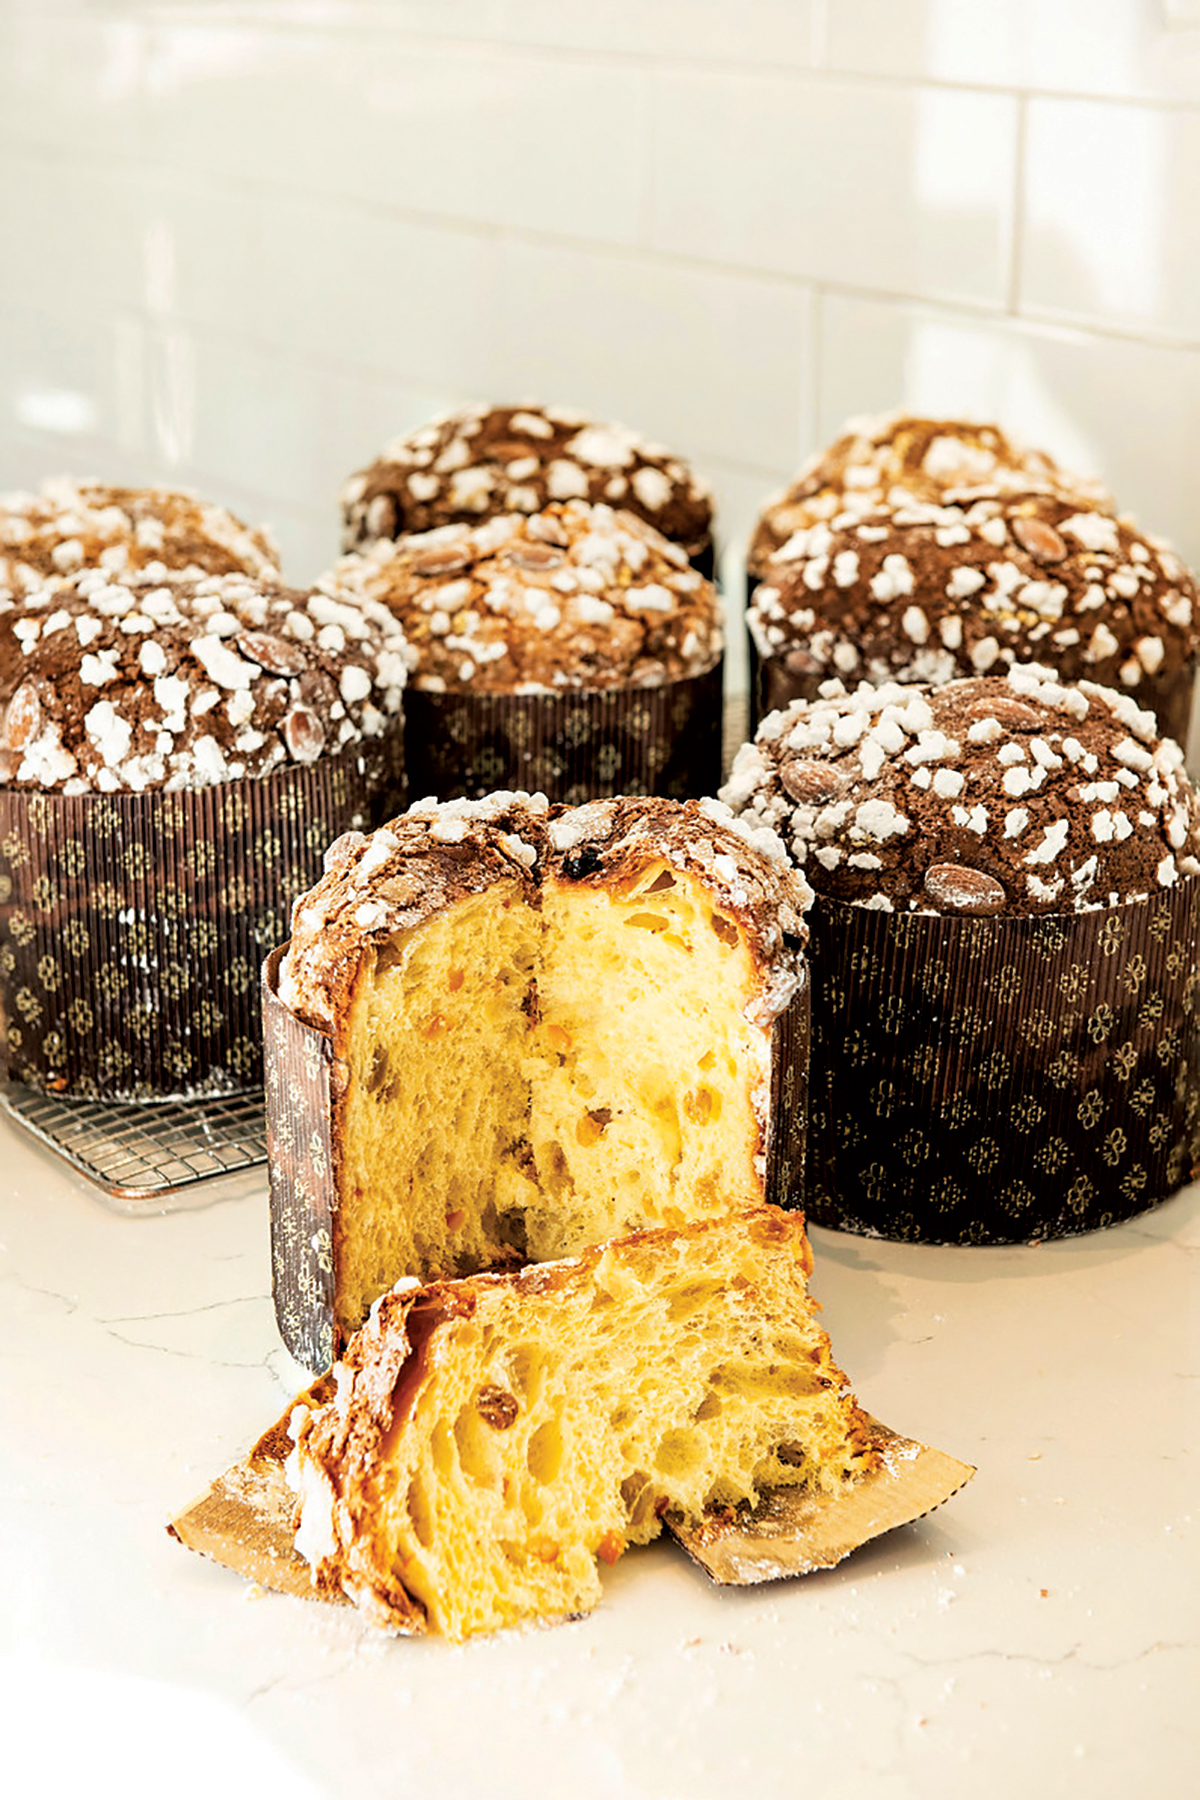 Group of panettone, one in front is sliced